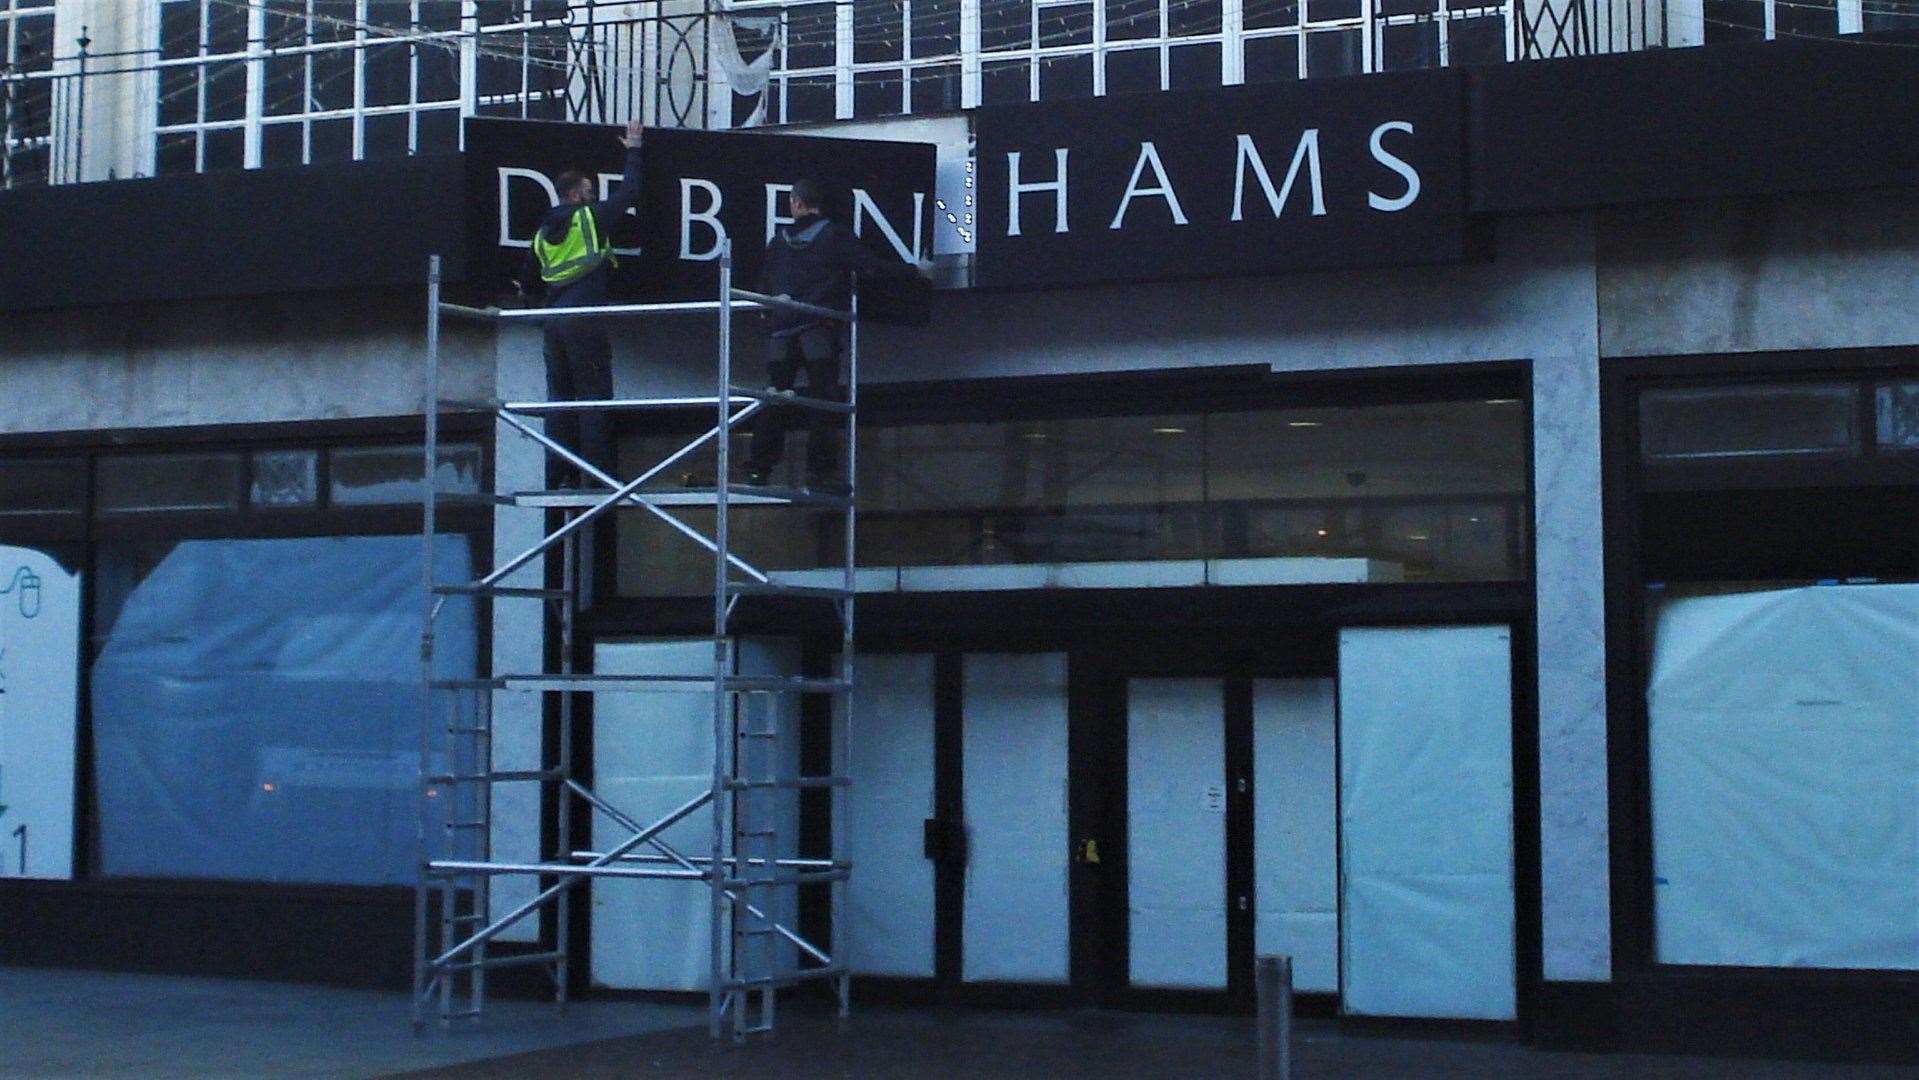 Workers remove the Debenhams sign at the Folkestone store in January this year - the shop has been empty ever since. Picture credit: Legends of Folkestone Facebook page